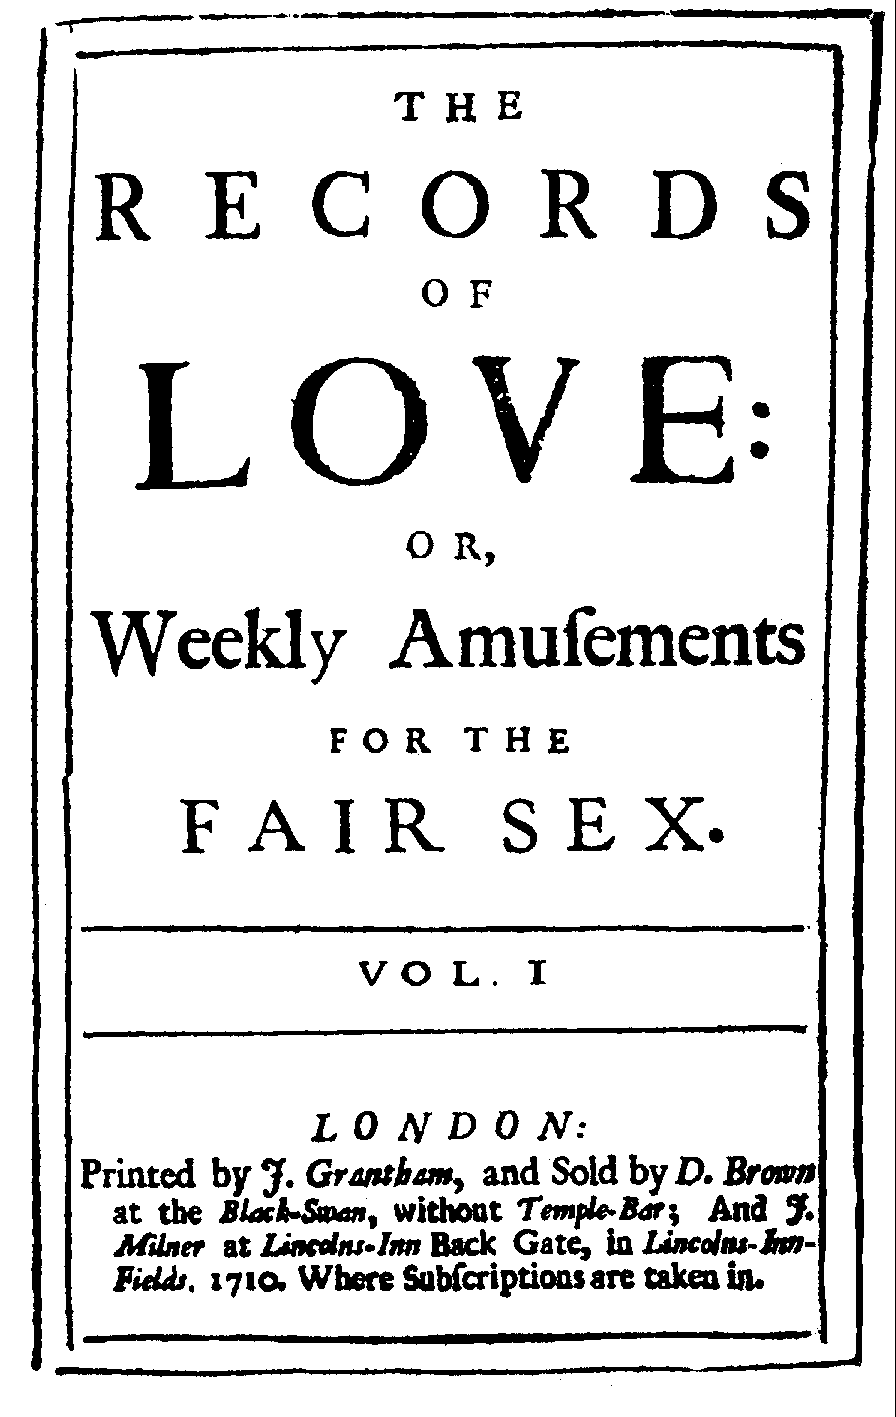 The Records of Love: or, Weekly Amusements for the Fair Sex (London: D. Brown, J. Milner, 1710).